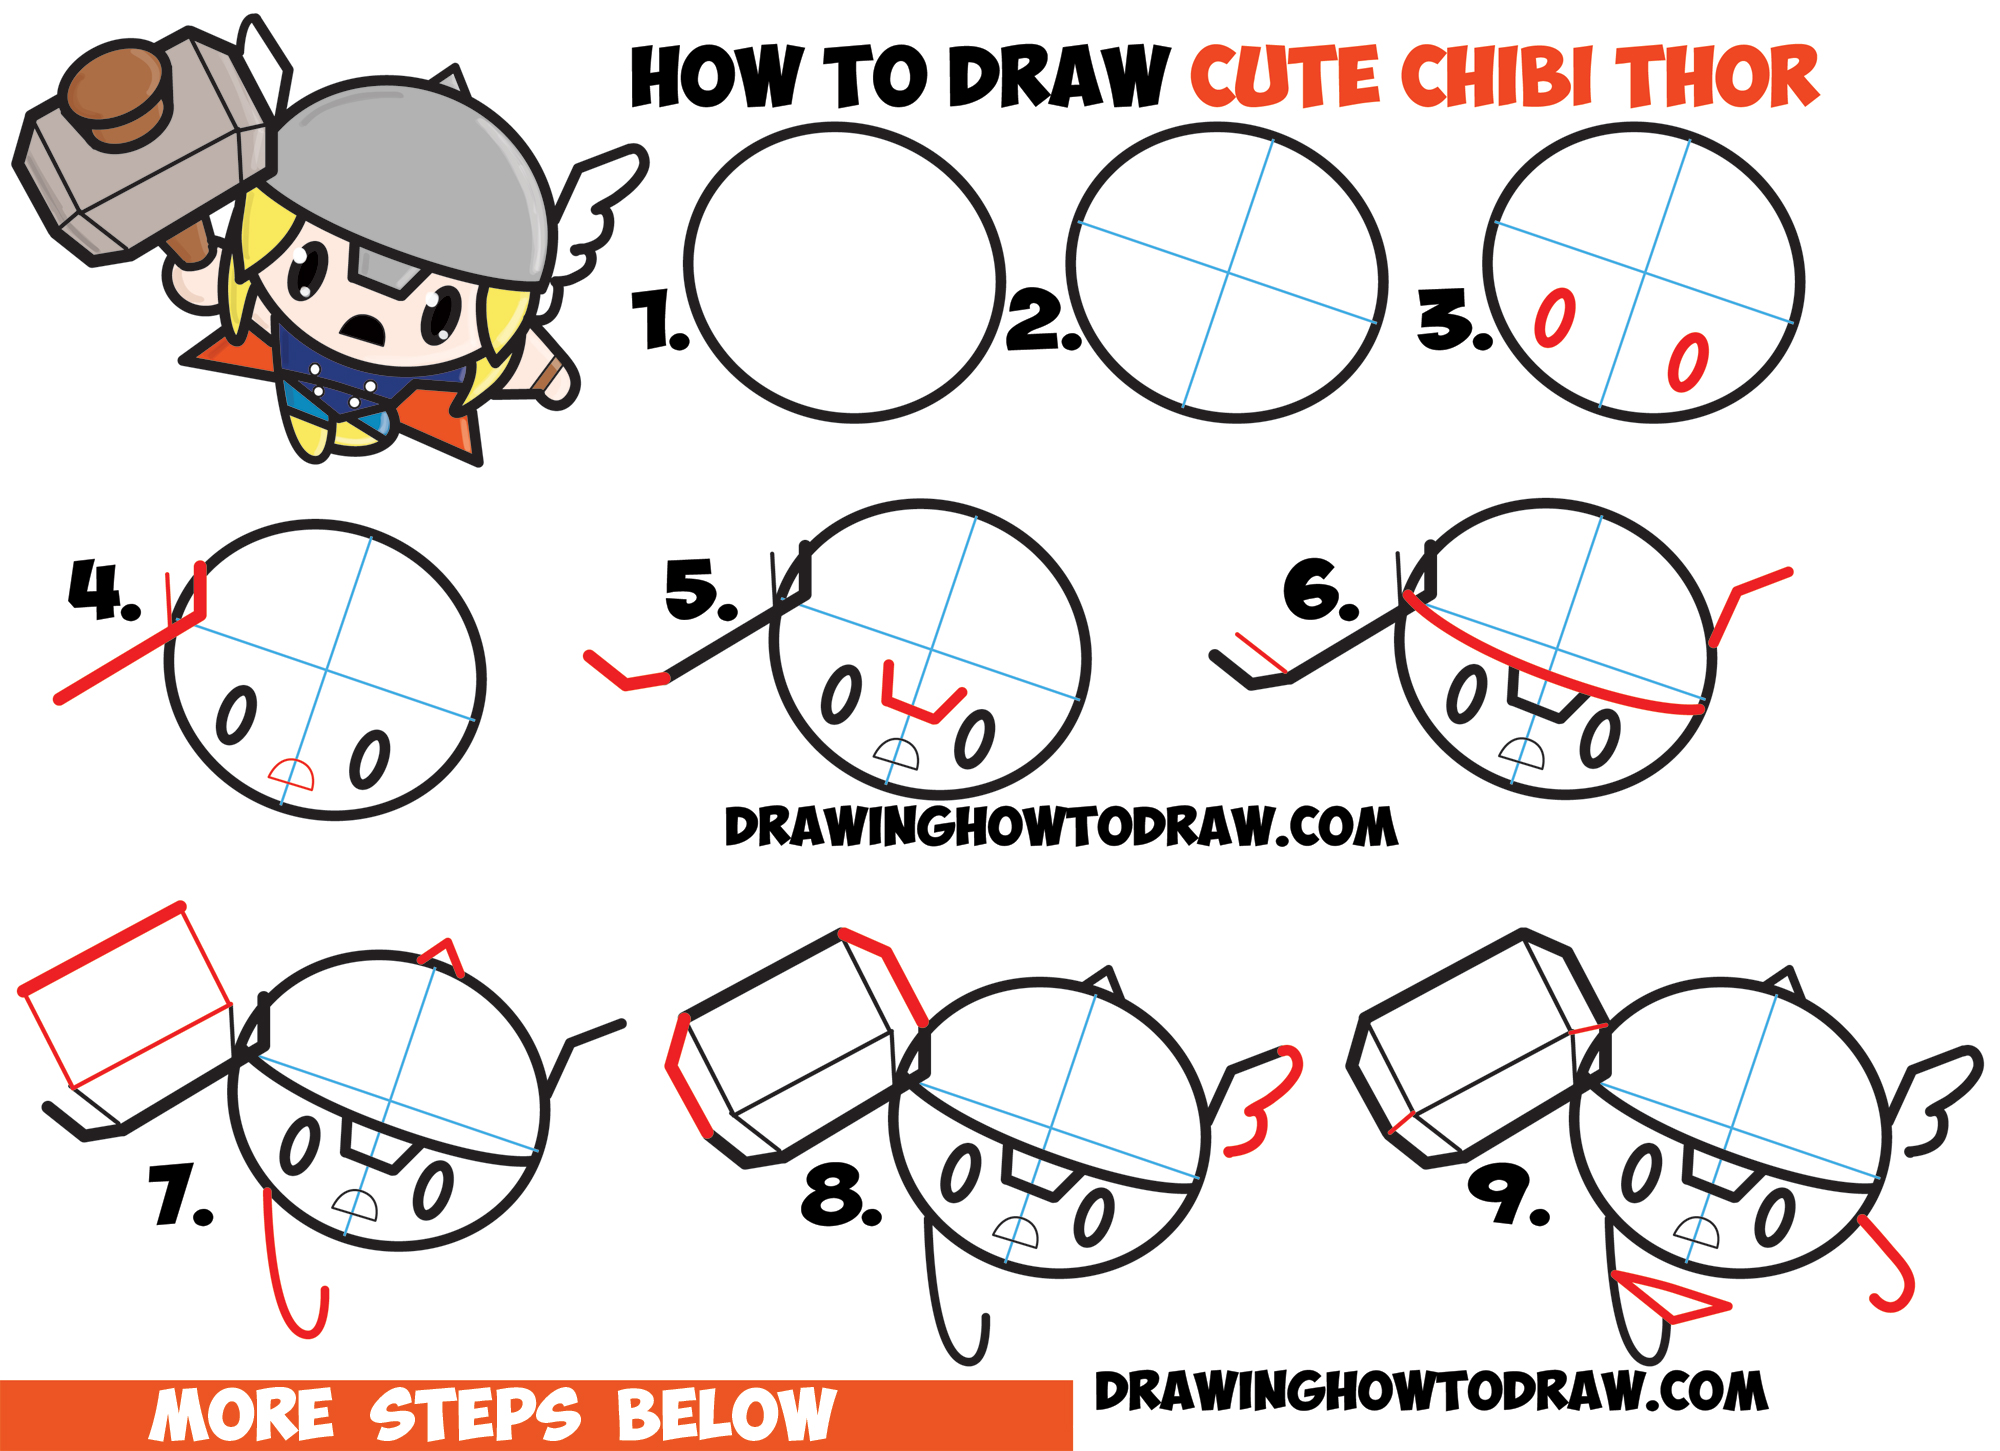 How to Draw Cute Chibi Kawaii Thor from Marvel Comics in Easy Steps Drawing Tutorial